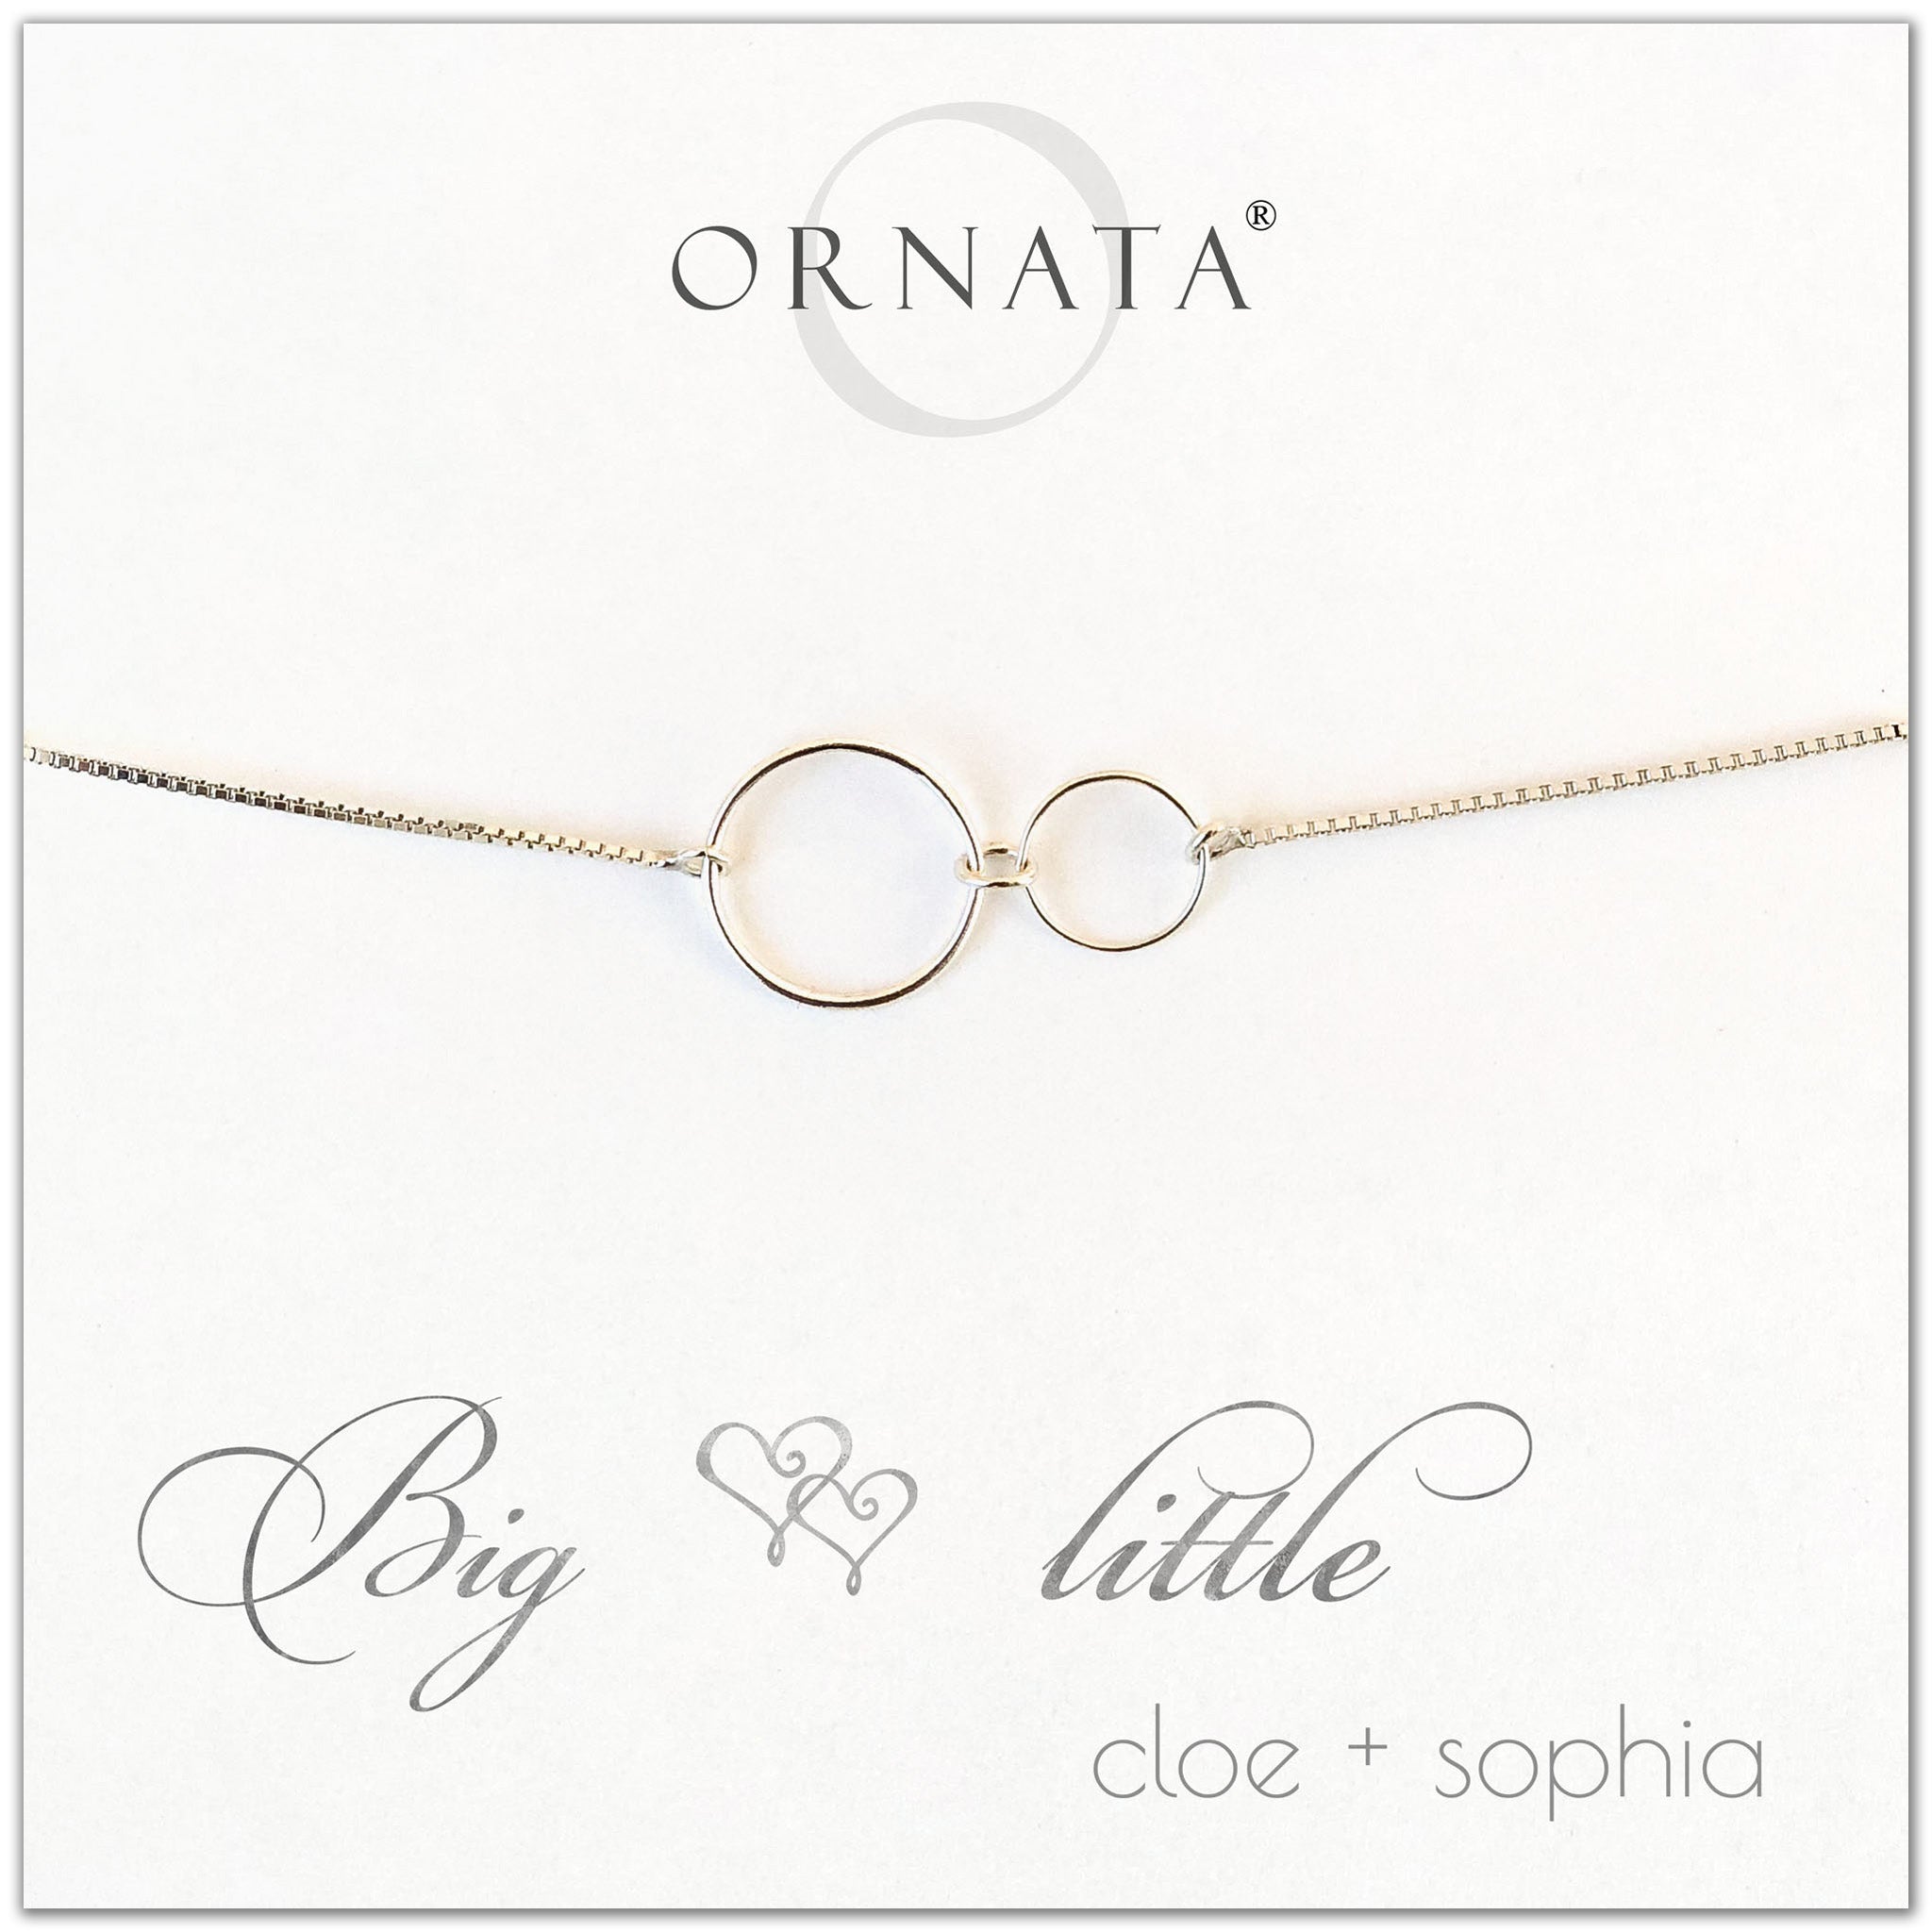 Big Little Sorority Sisters personalized sterling silver bolo bracelet. Our custom bracelets make good gifts for sororities or sisters. Perfect for big little reveal day! 